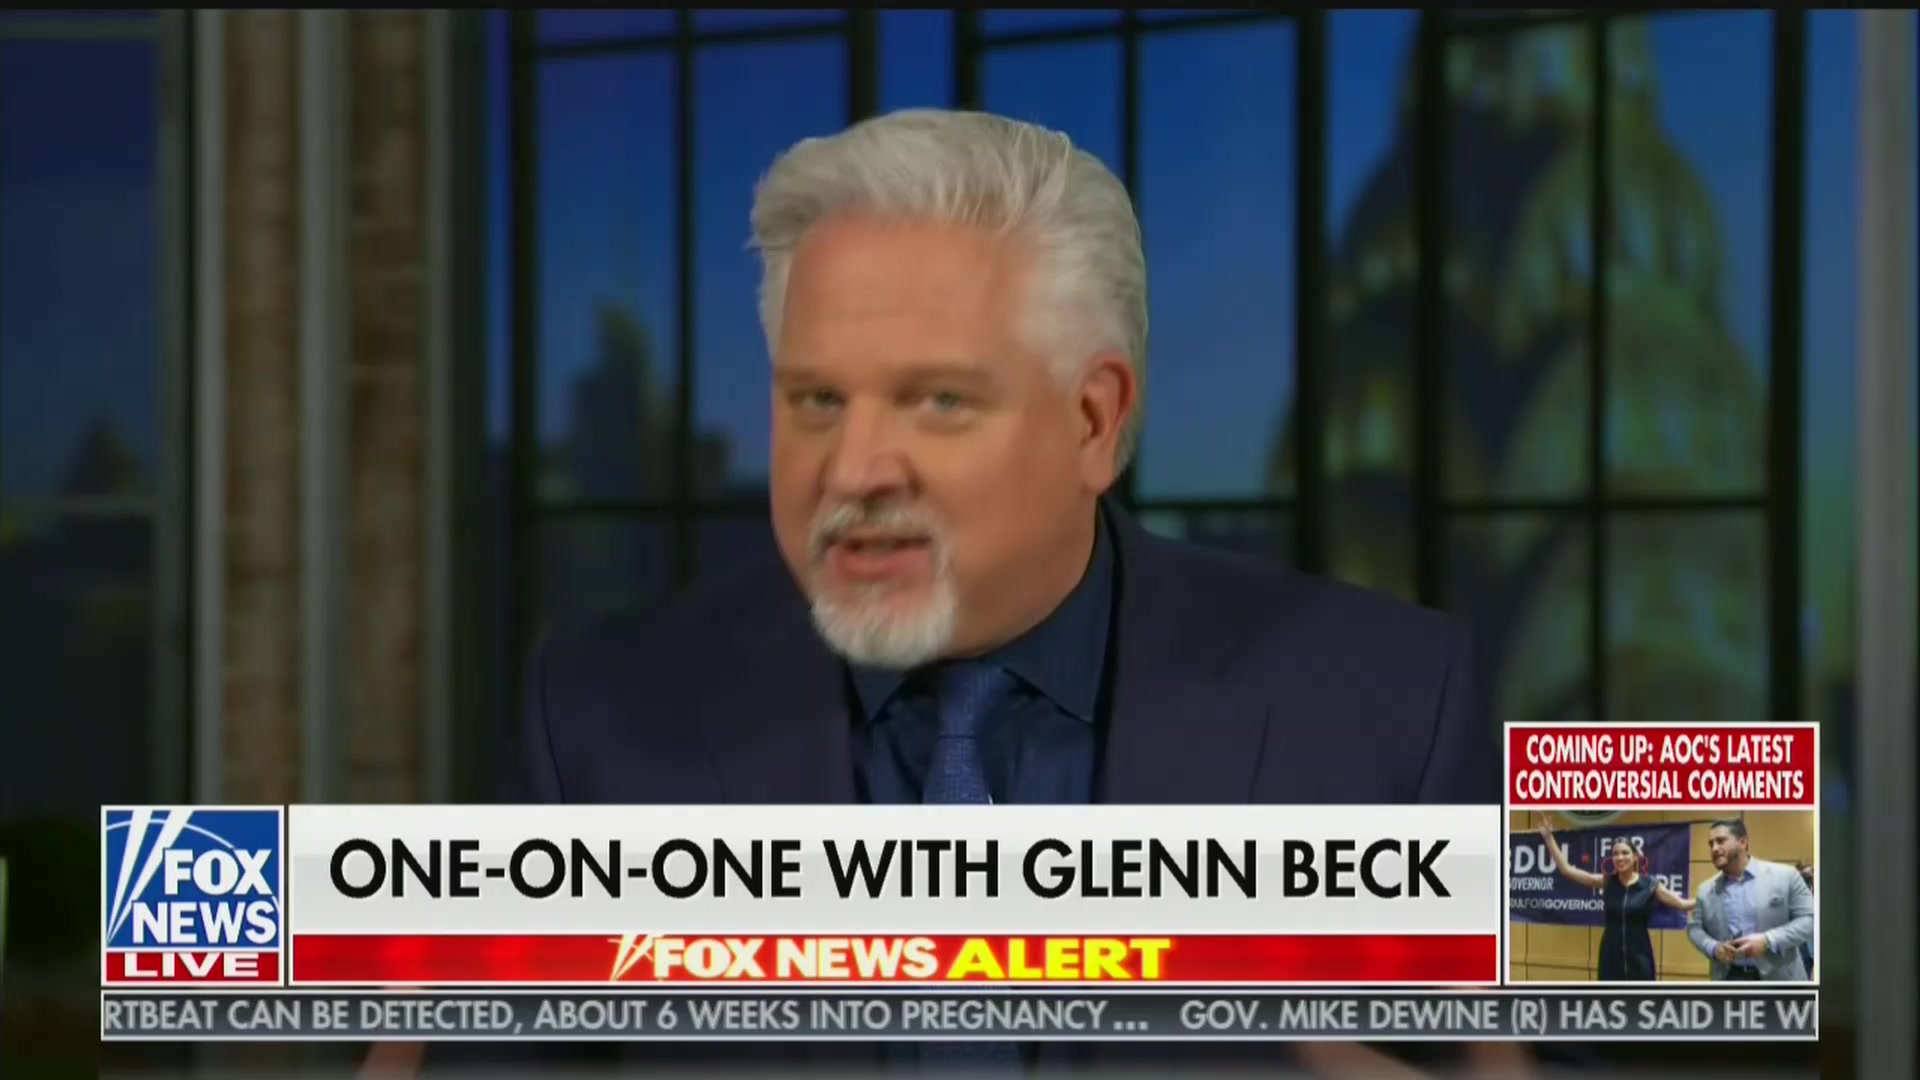 Glenn Beck Parrots Conspiracy Theory That Partly Motivated Tree of Life Synagogue Shooter